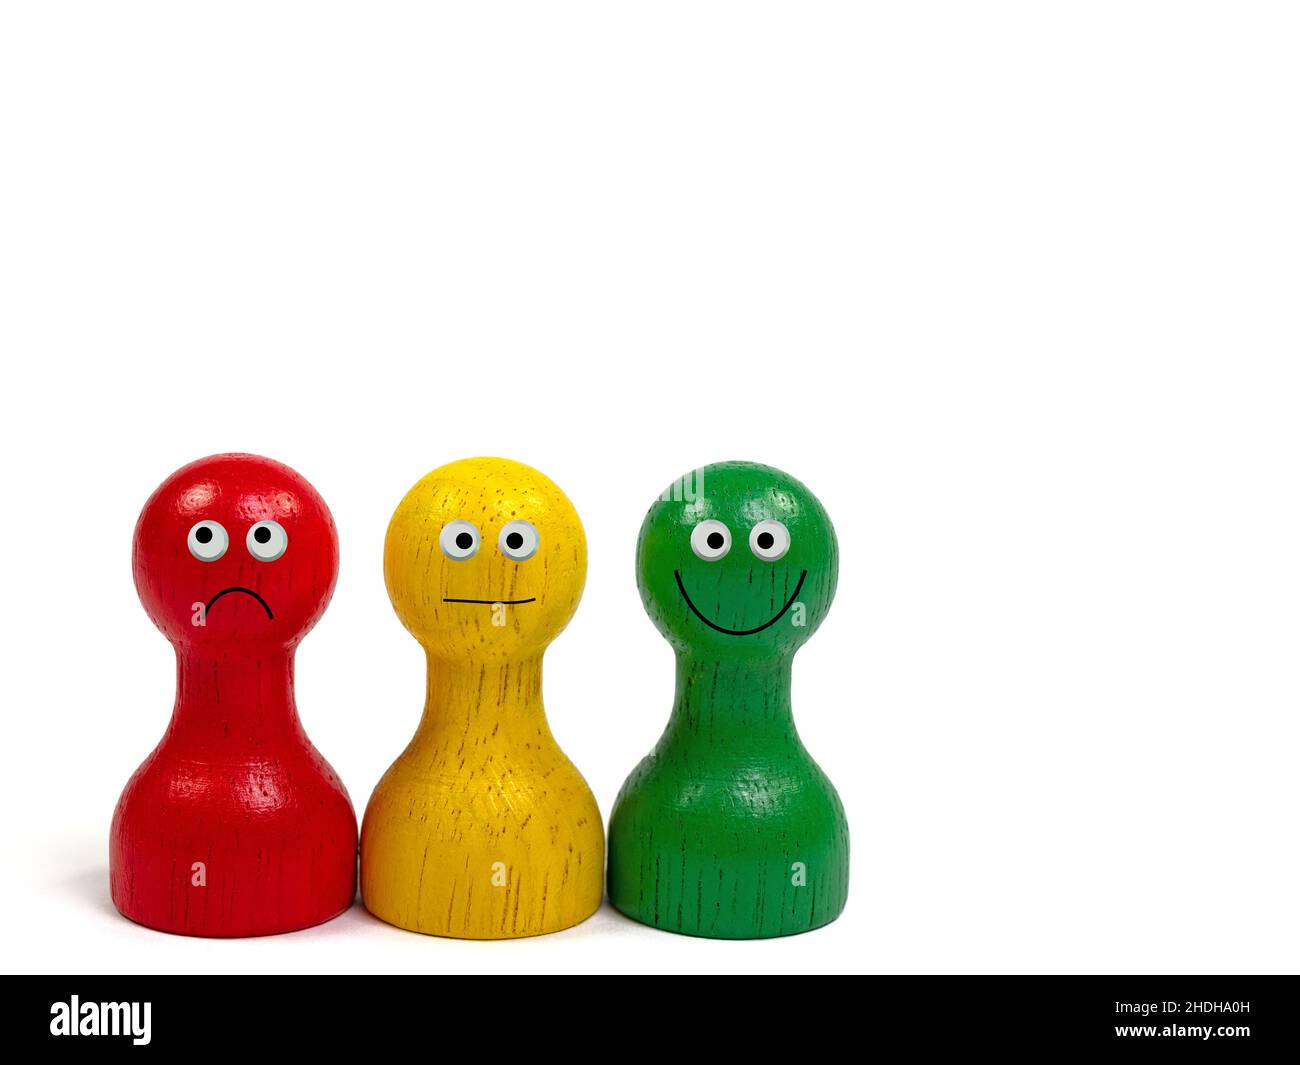 Three colorful wooden cones with faces Stock Photo